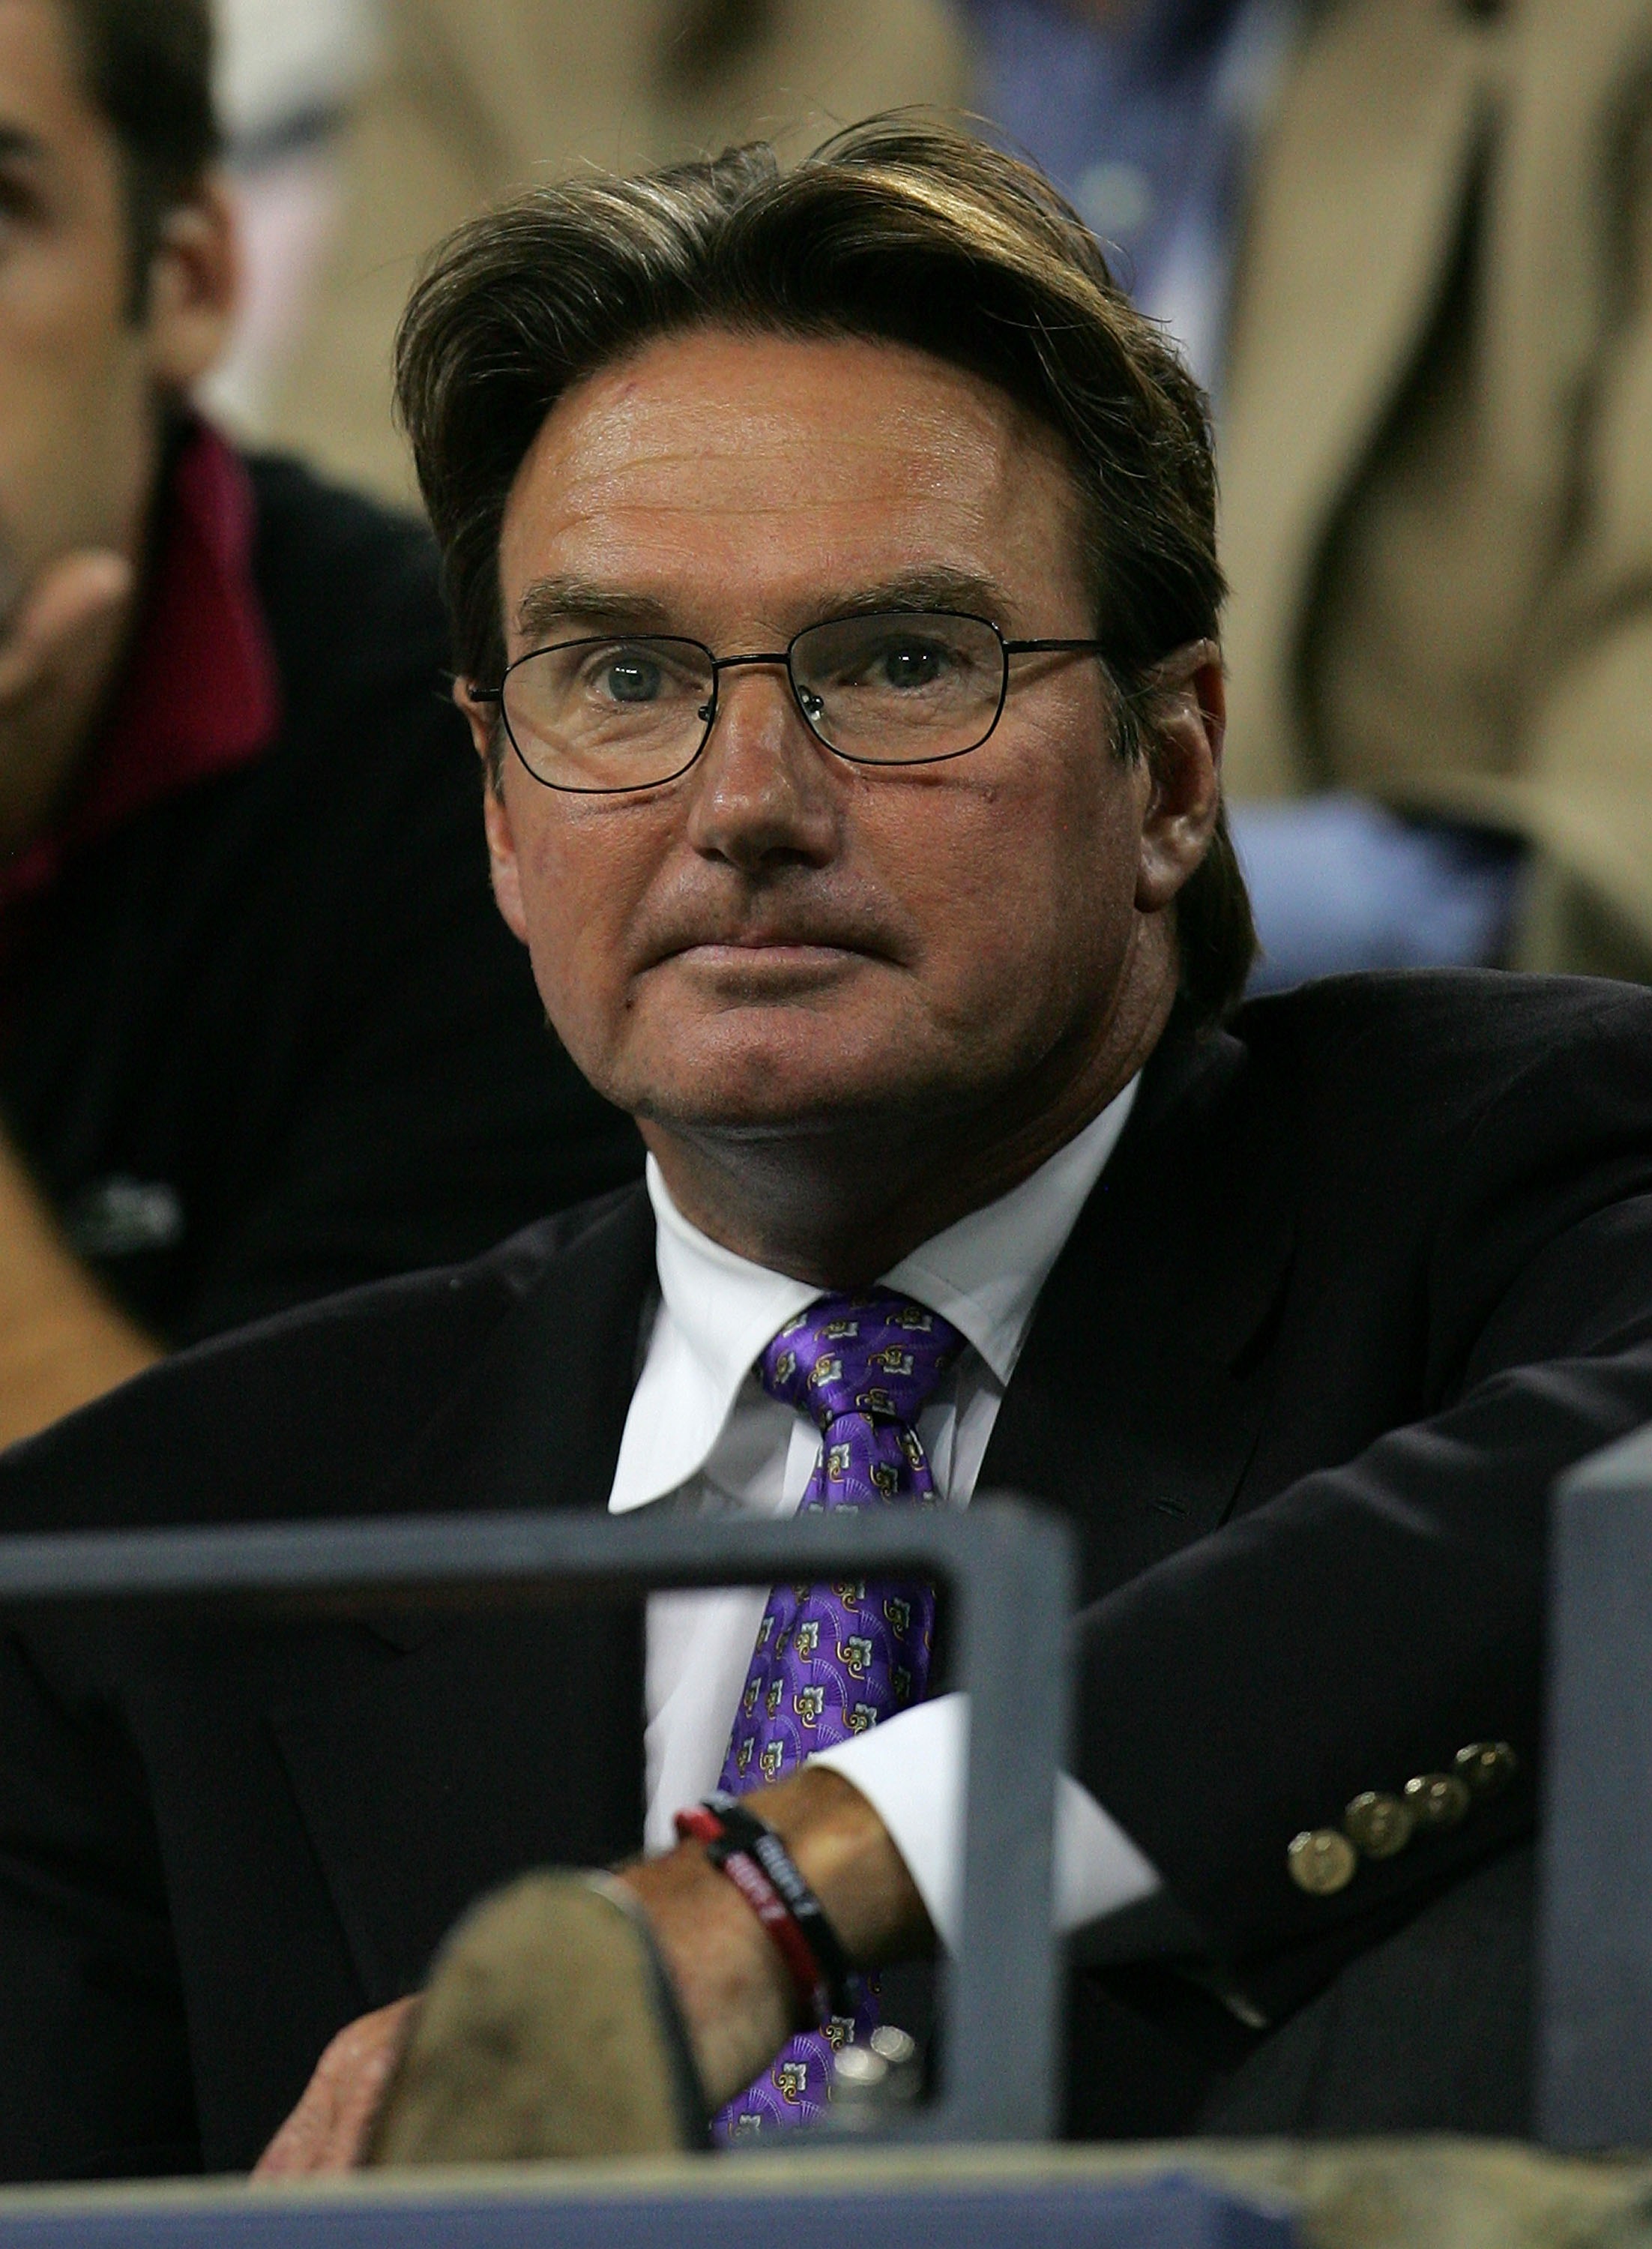 NEW YORK - SEPTEMBER 05:  Jimmy Connors, coach of Andy Roddick, watches Roddick play Roger Federer during day ten of the 2007 U.S. Open at the Billie Jean King National Tennis Center on September 5, 2007 in the Flushing neighborhood of the Queens borough